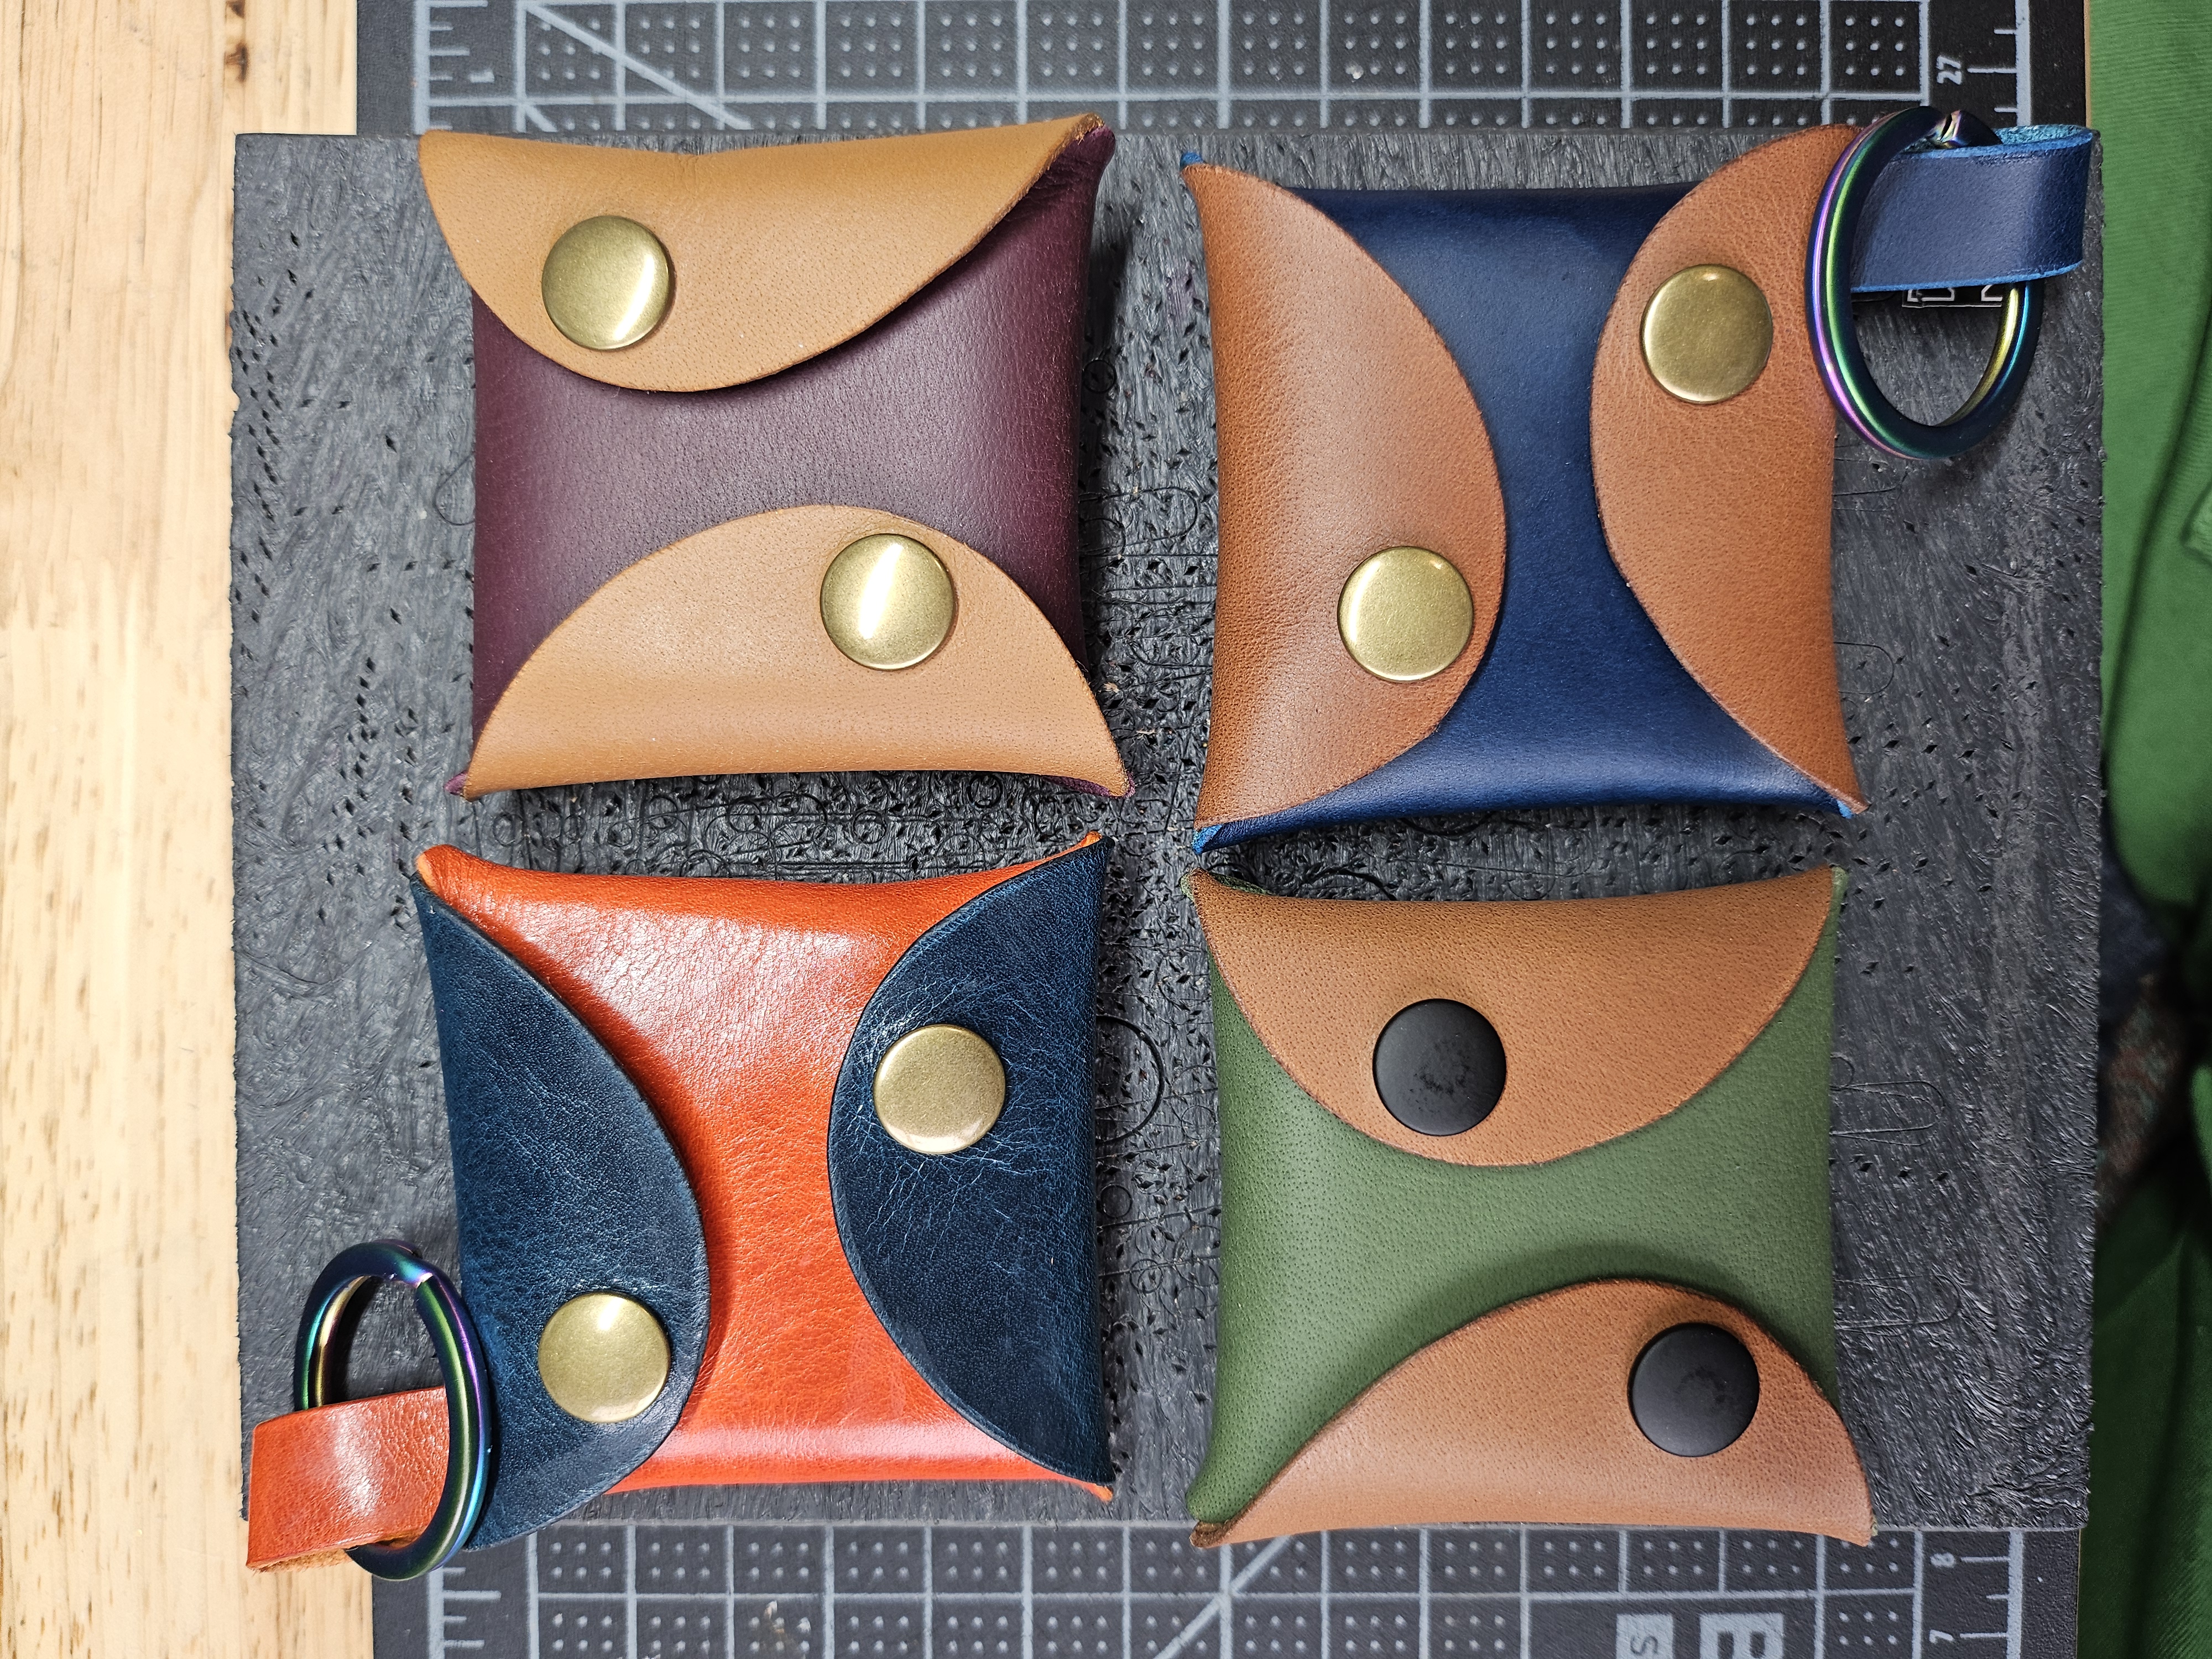 4 square pouches that close with snaps. 2 have loops that attach keyrings. They are in various colors of leather.